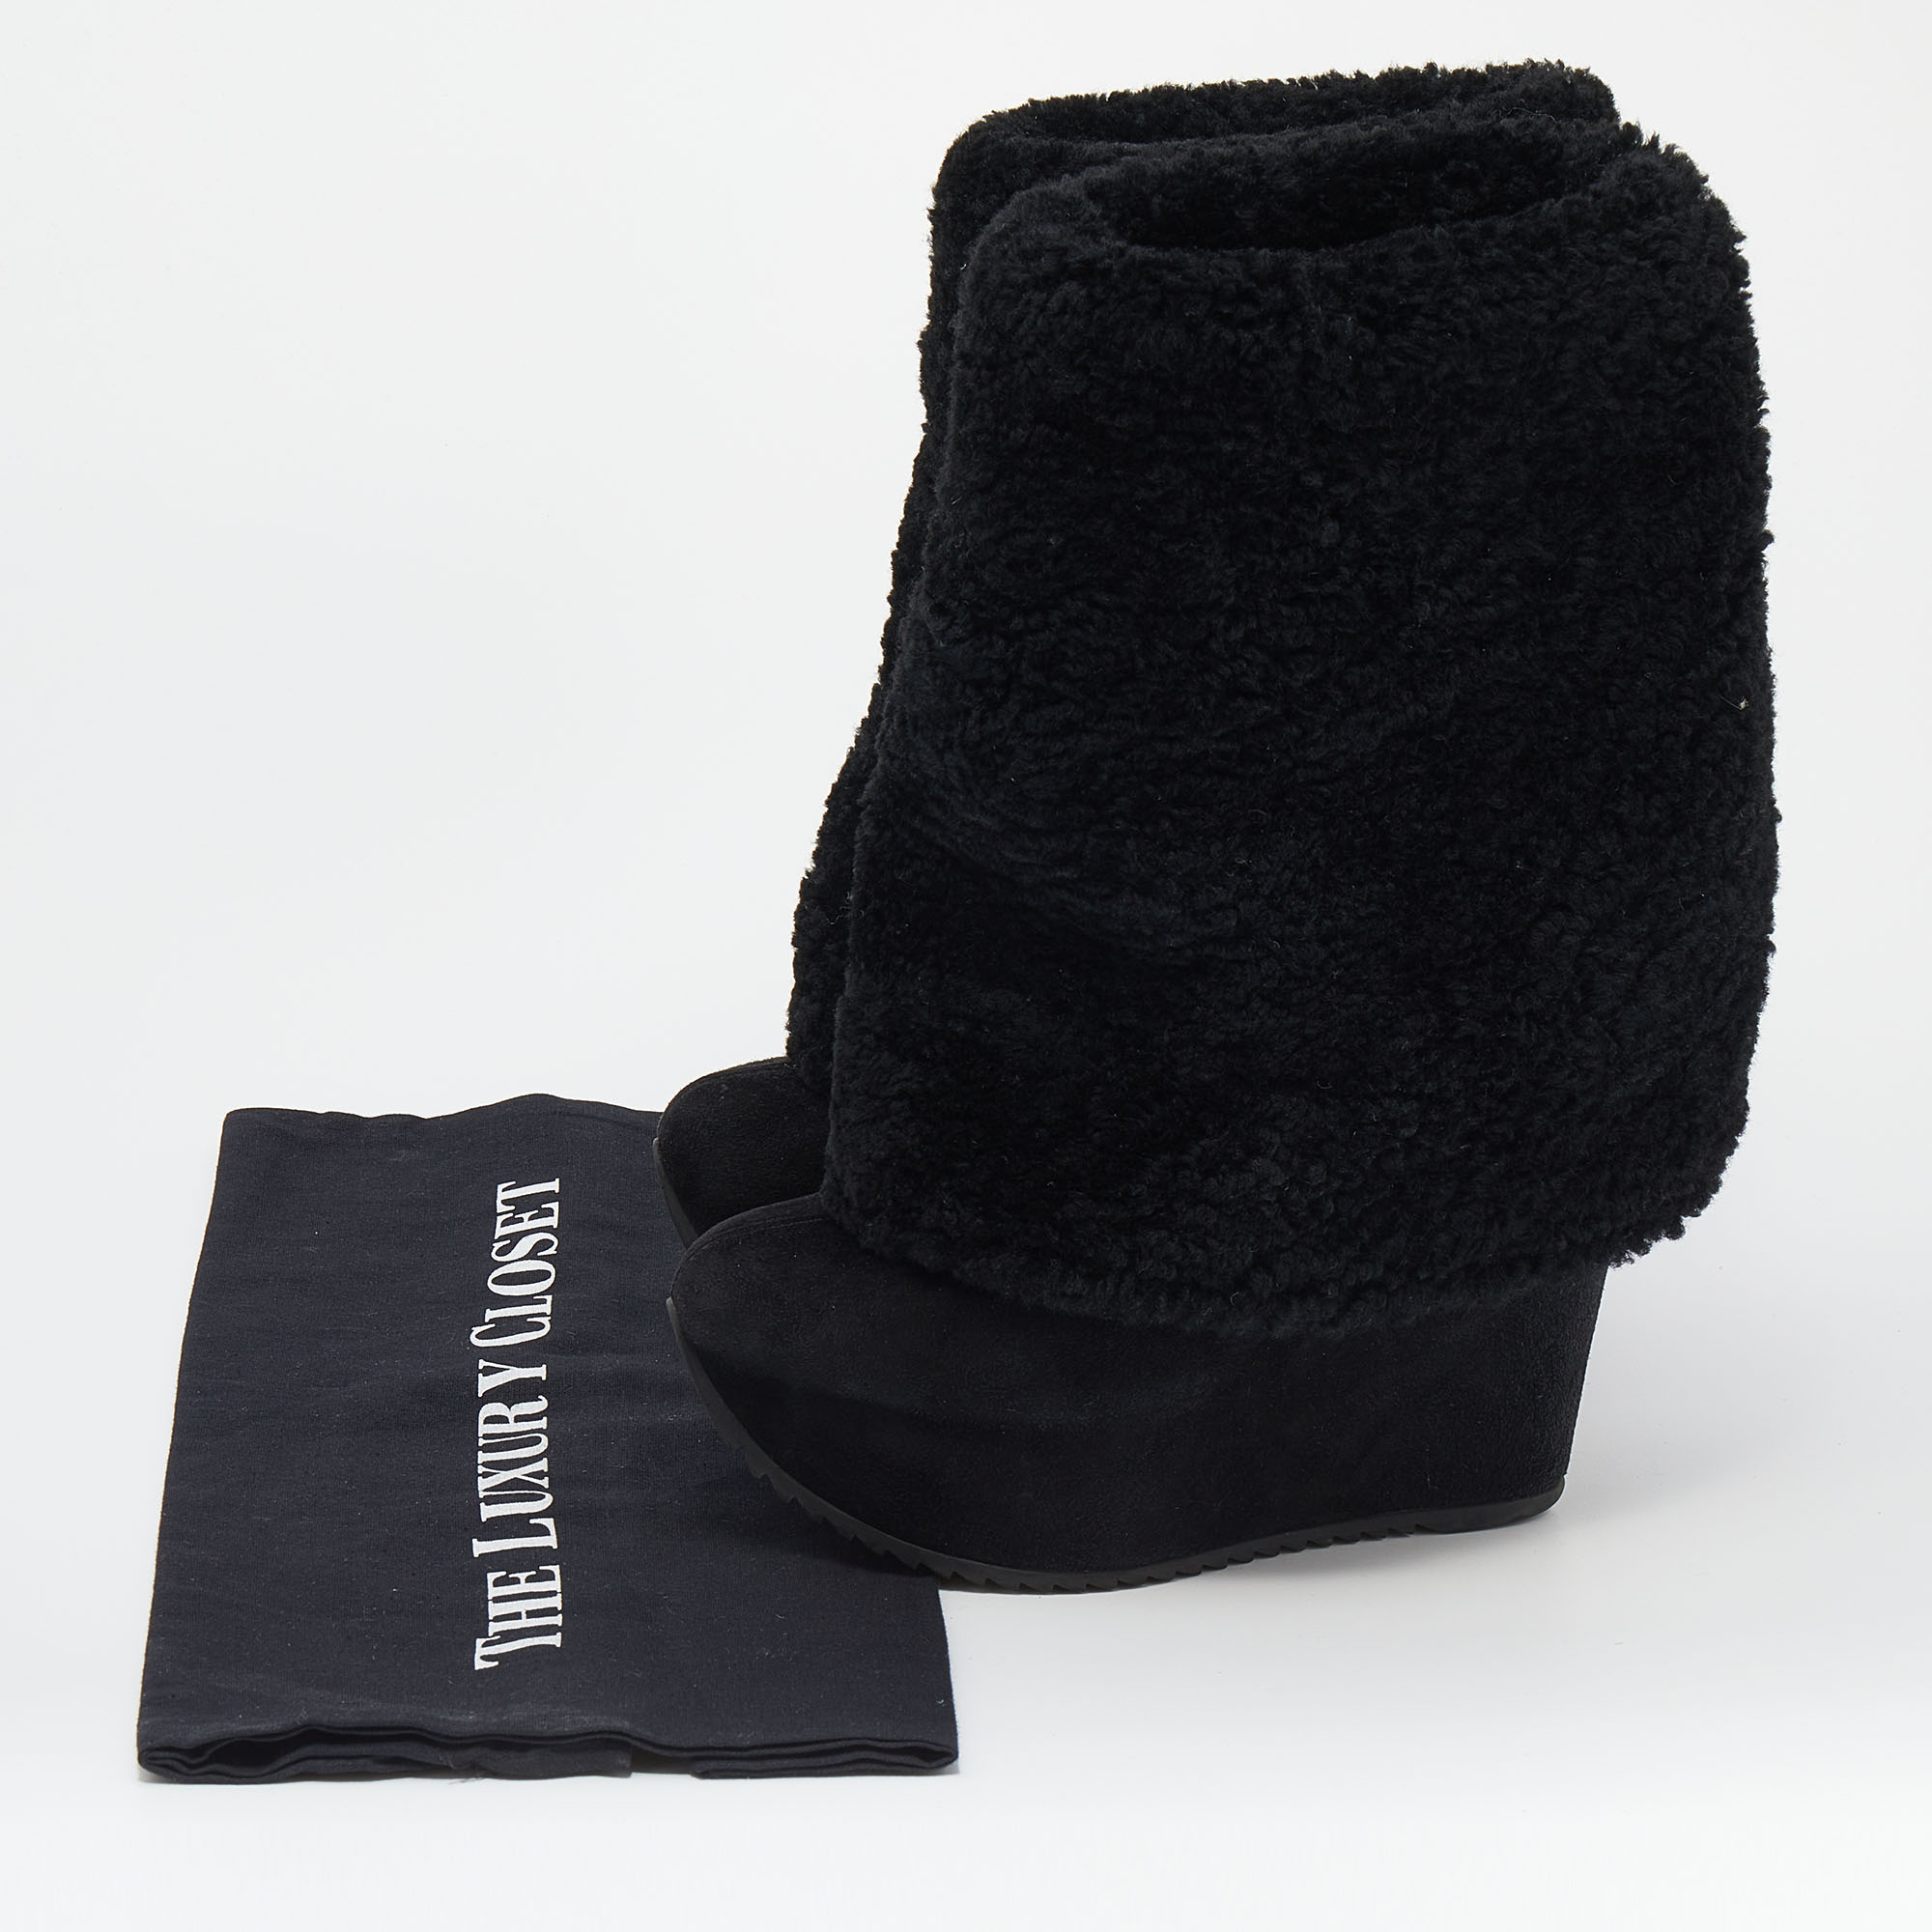 Saint Laurent Black Wool And Suede Wedge Boots Size 38